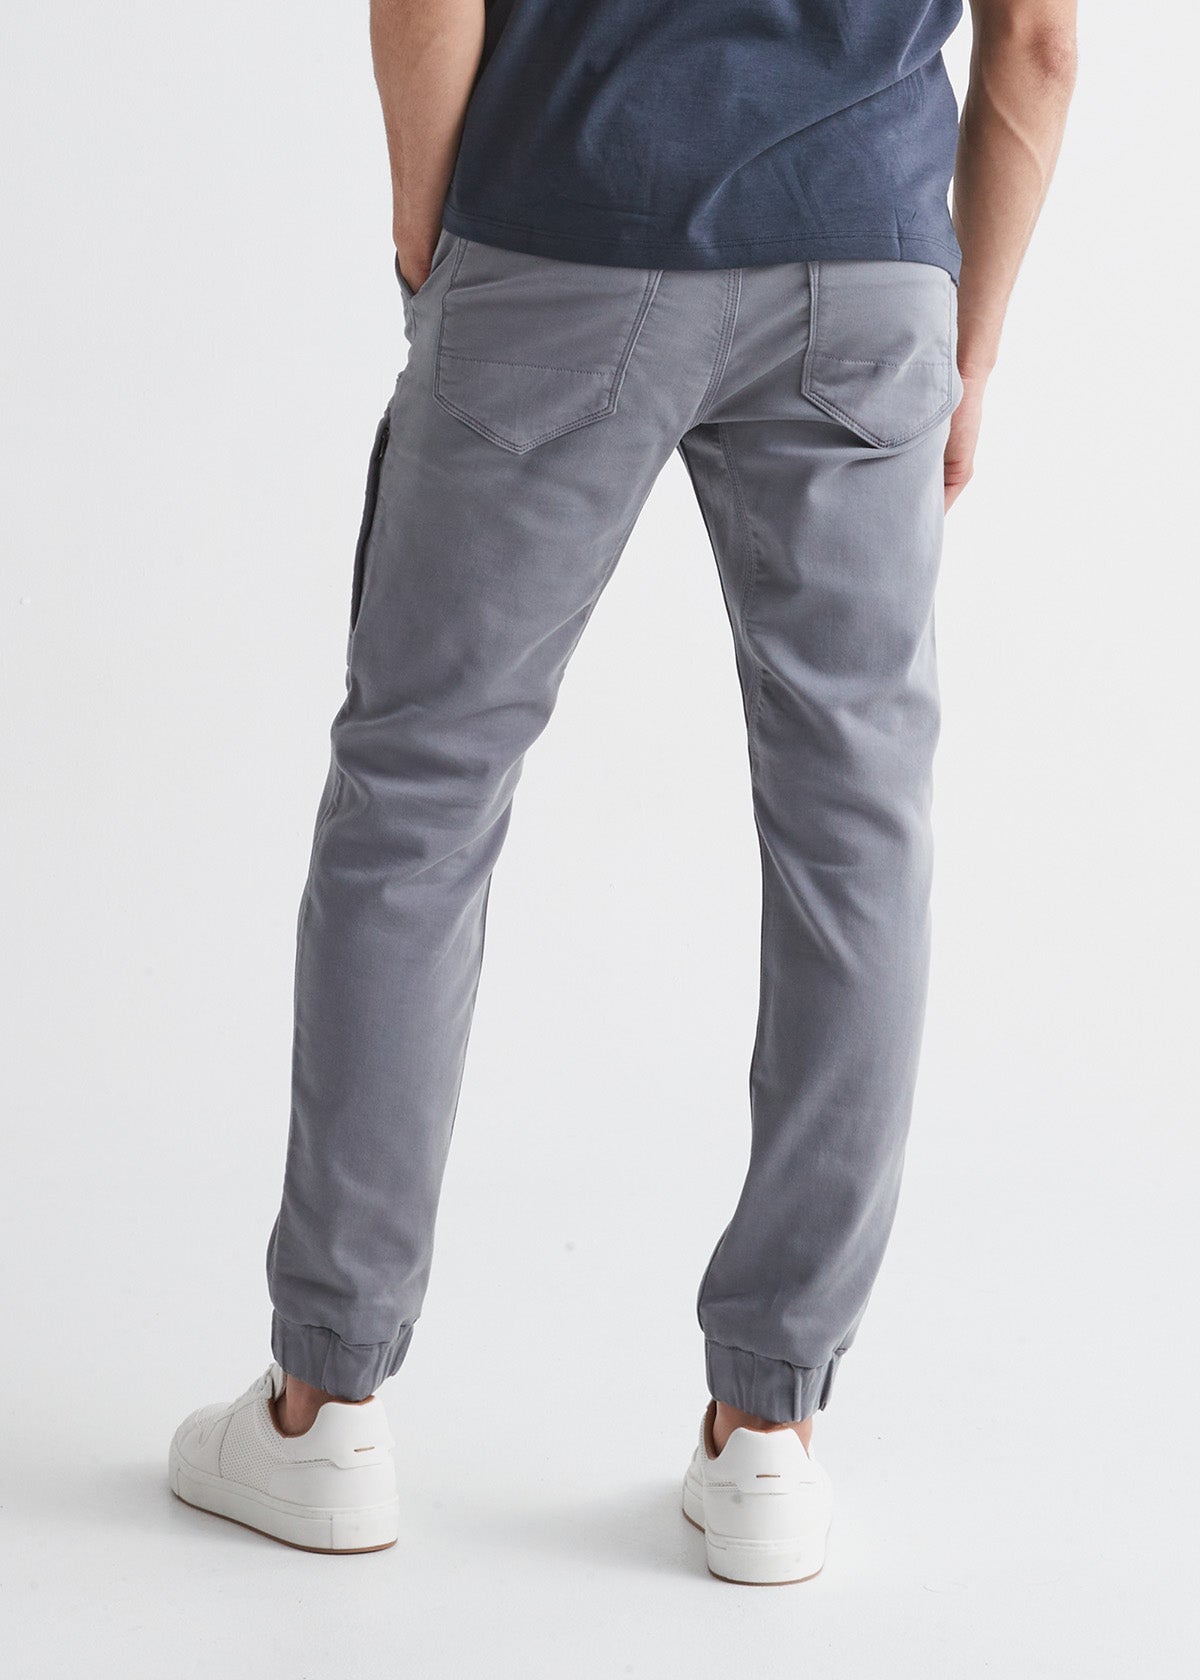 Charcoal Grey Joggers With Pockets, Drawstring Athleisure Wear